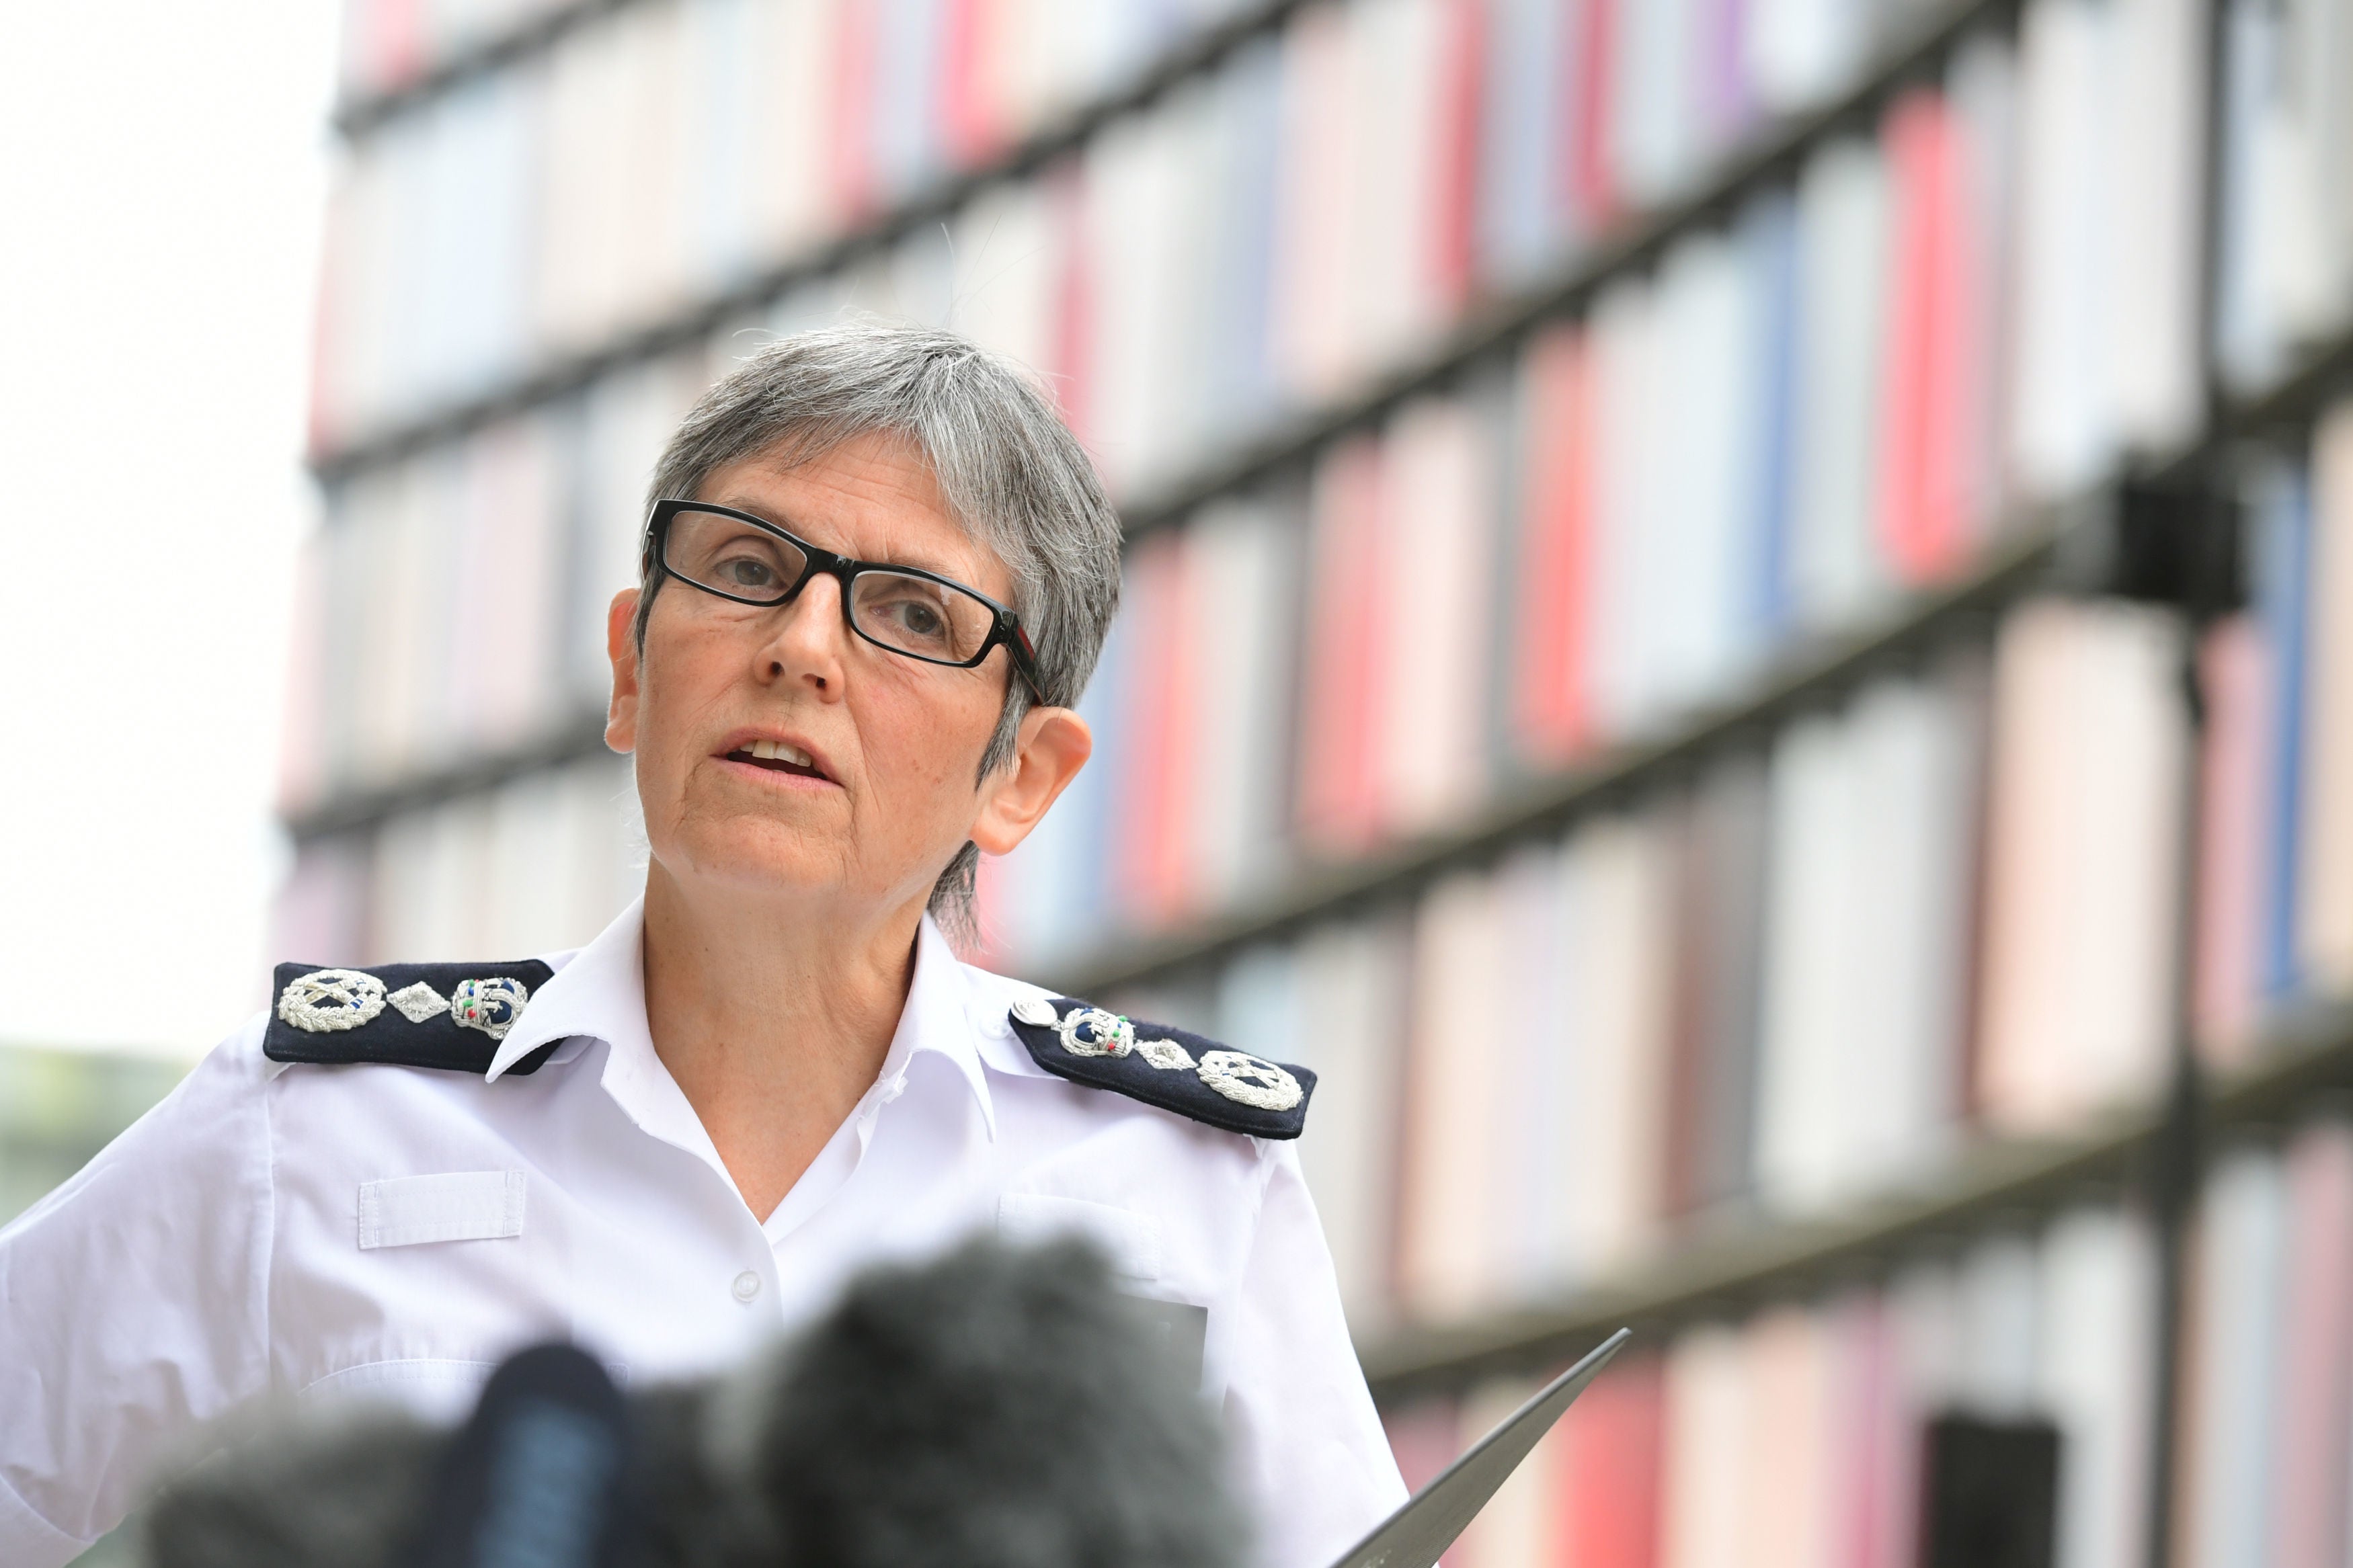 Metropolitan Police Commissioner Cressida Dick speaking outside the Old Bailey in July. An extension would see her in post until 2024